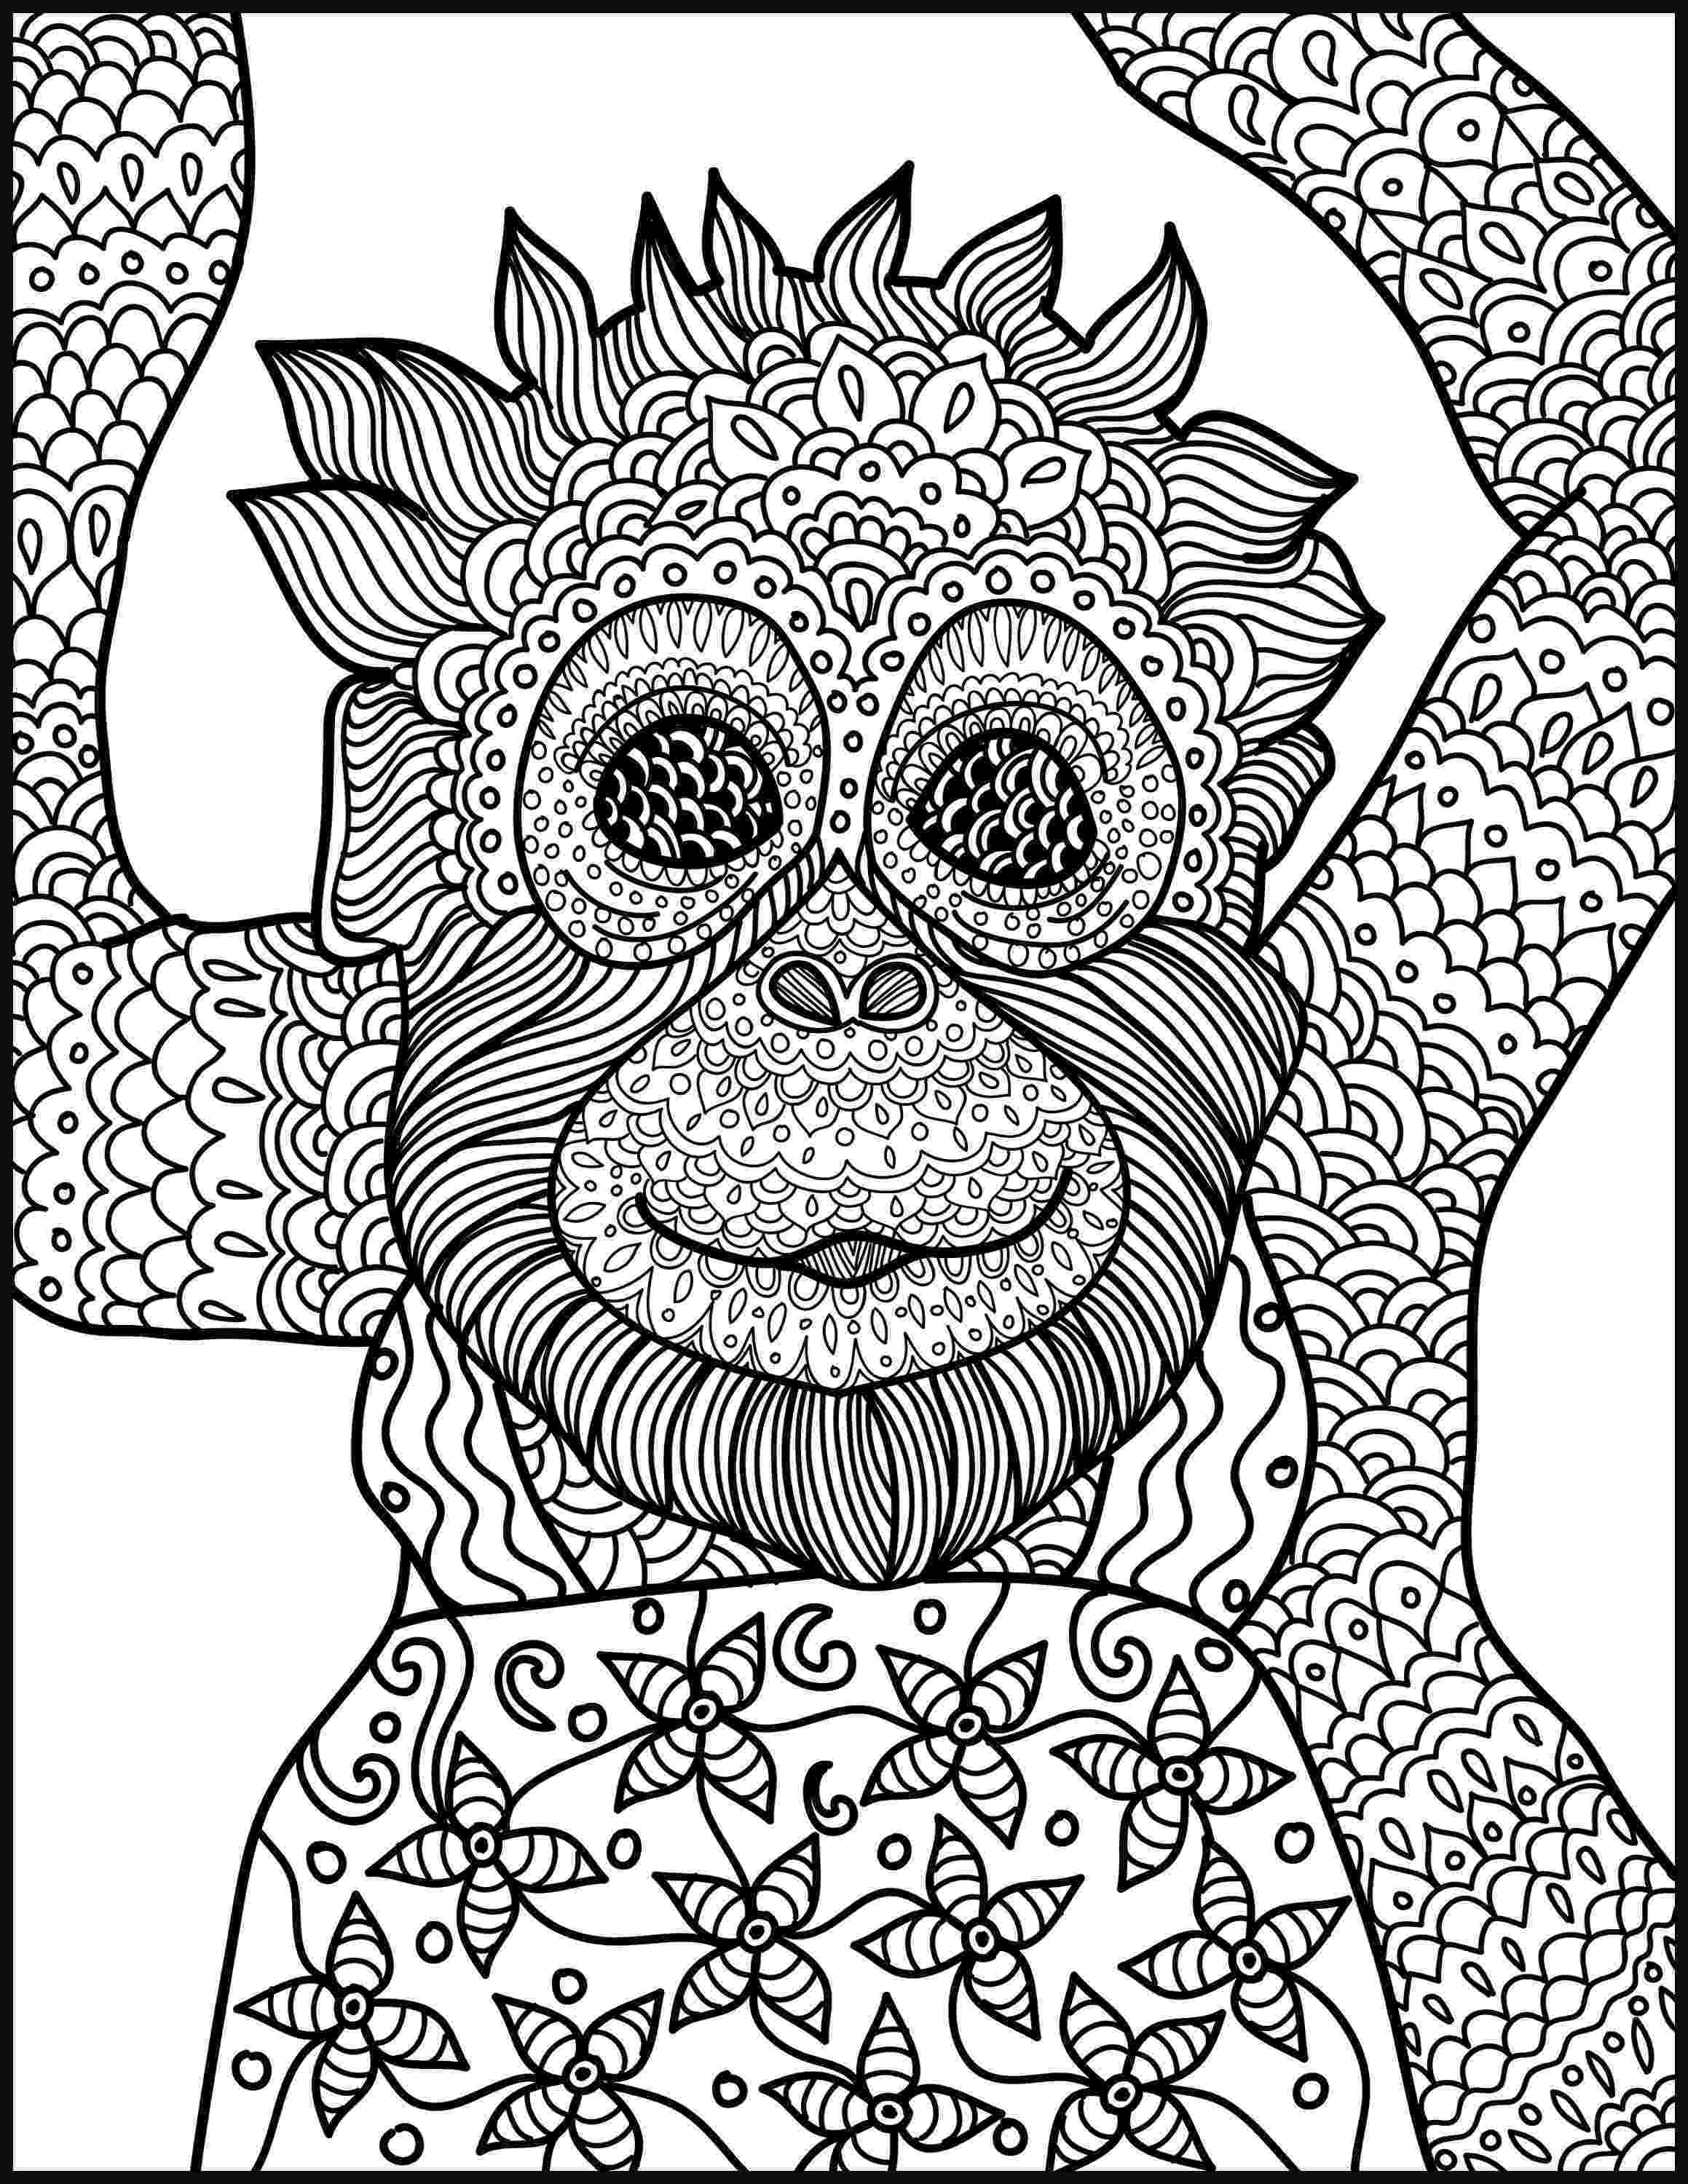 animal coloring pages adults 20 free adult colouring pages the organised housewife animal adults pages coloring 